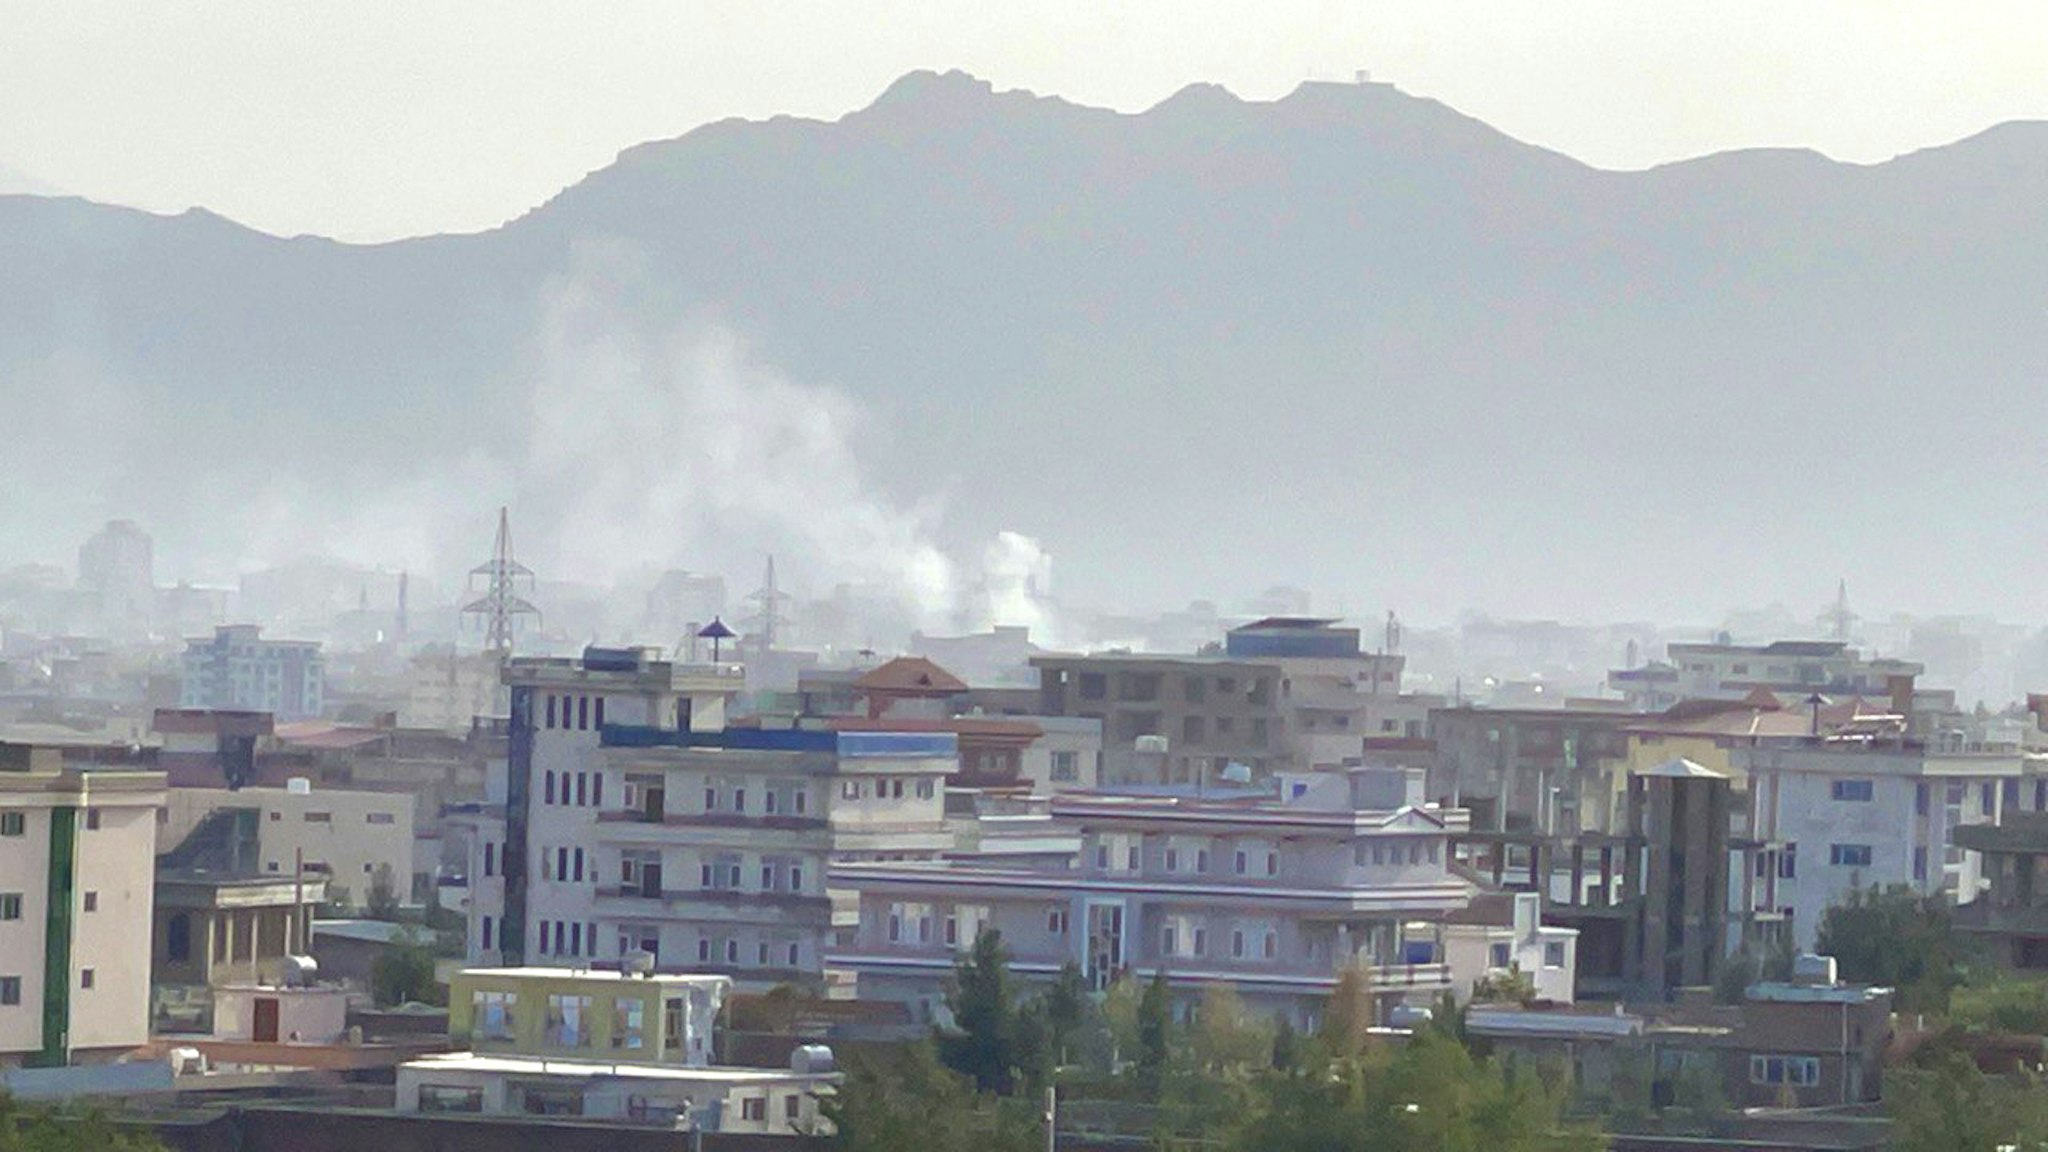 KABUL, AFGHANISTAN - AUGUST 29: Smoke rises after an explosion in Kabul, Afghanistan on August 29, 2021.